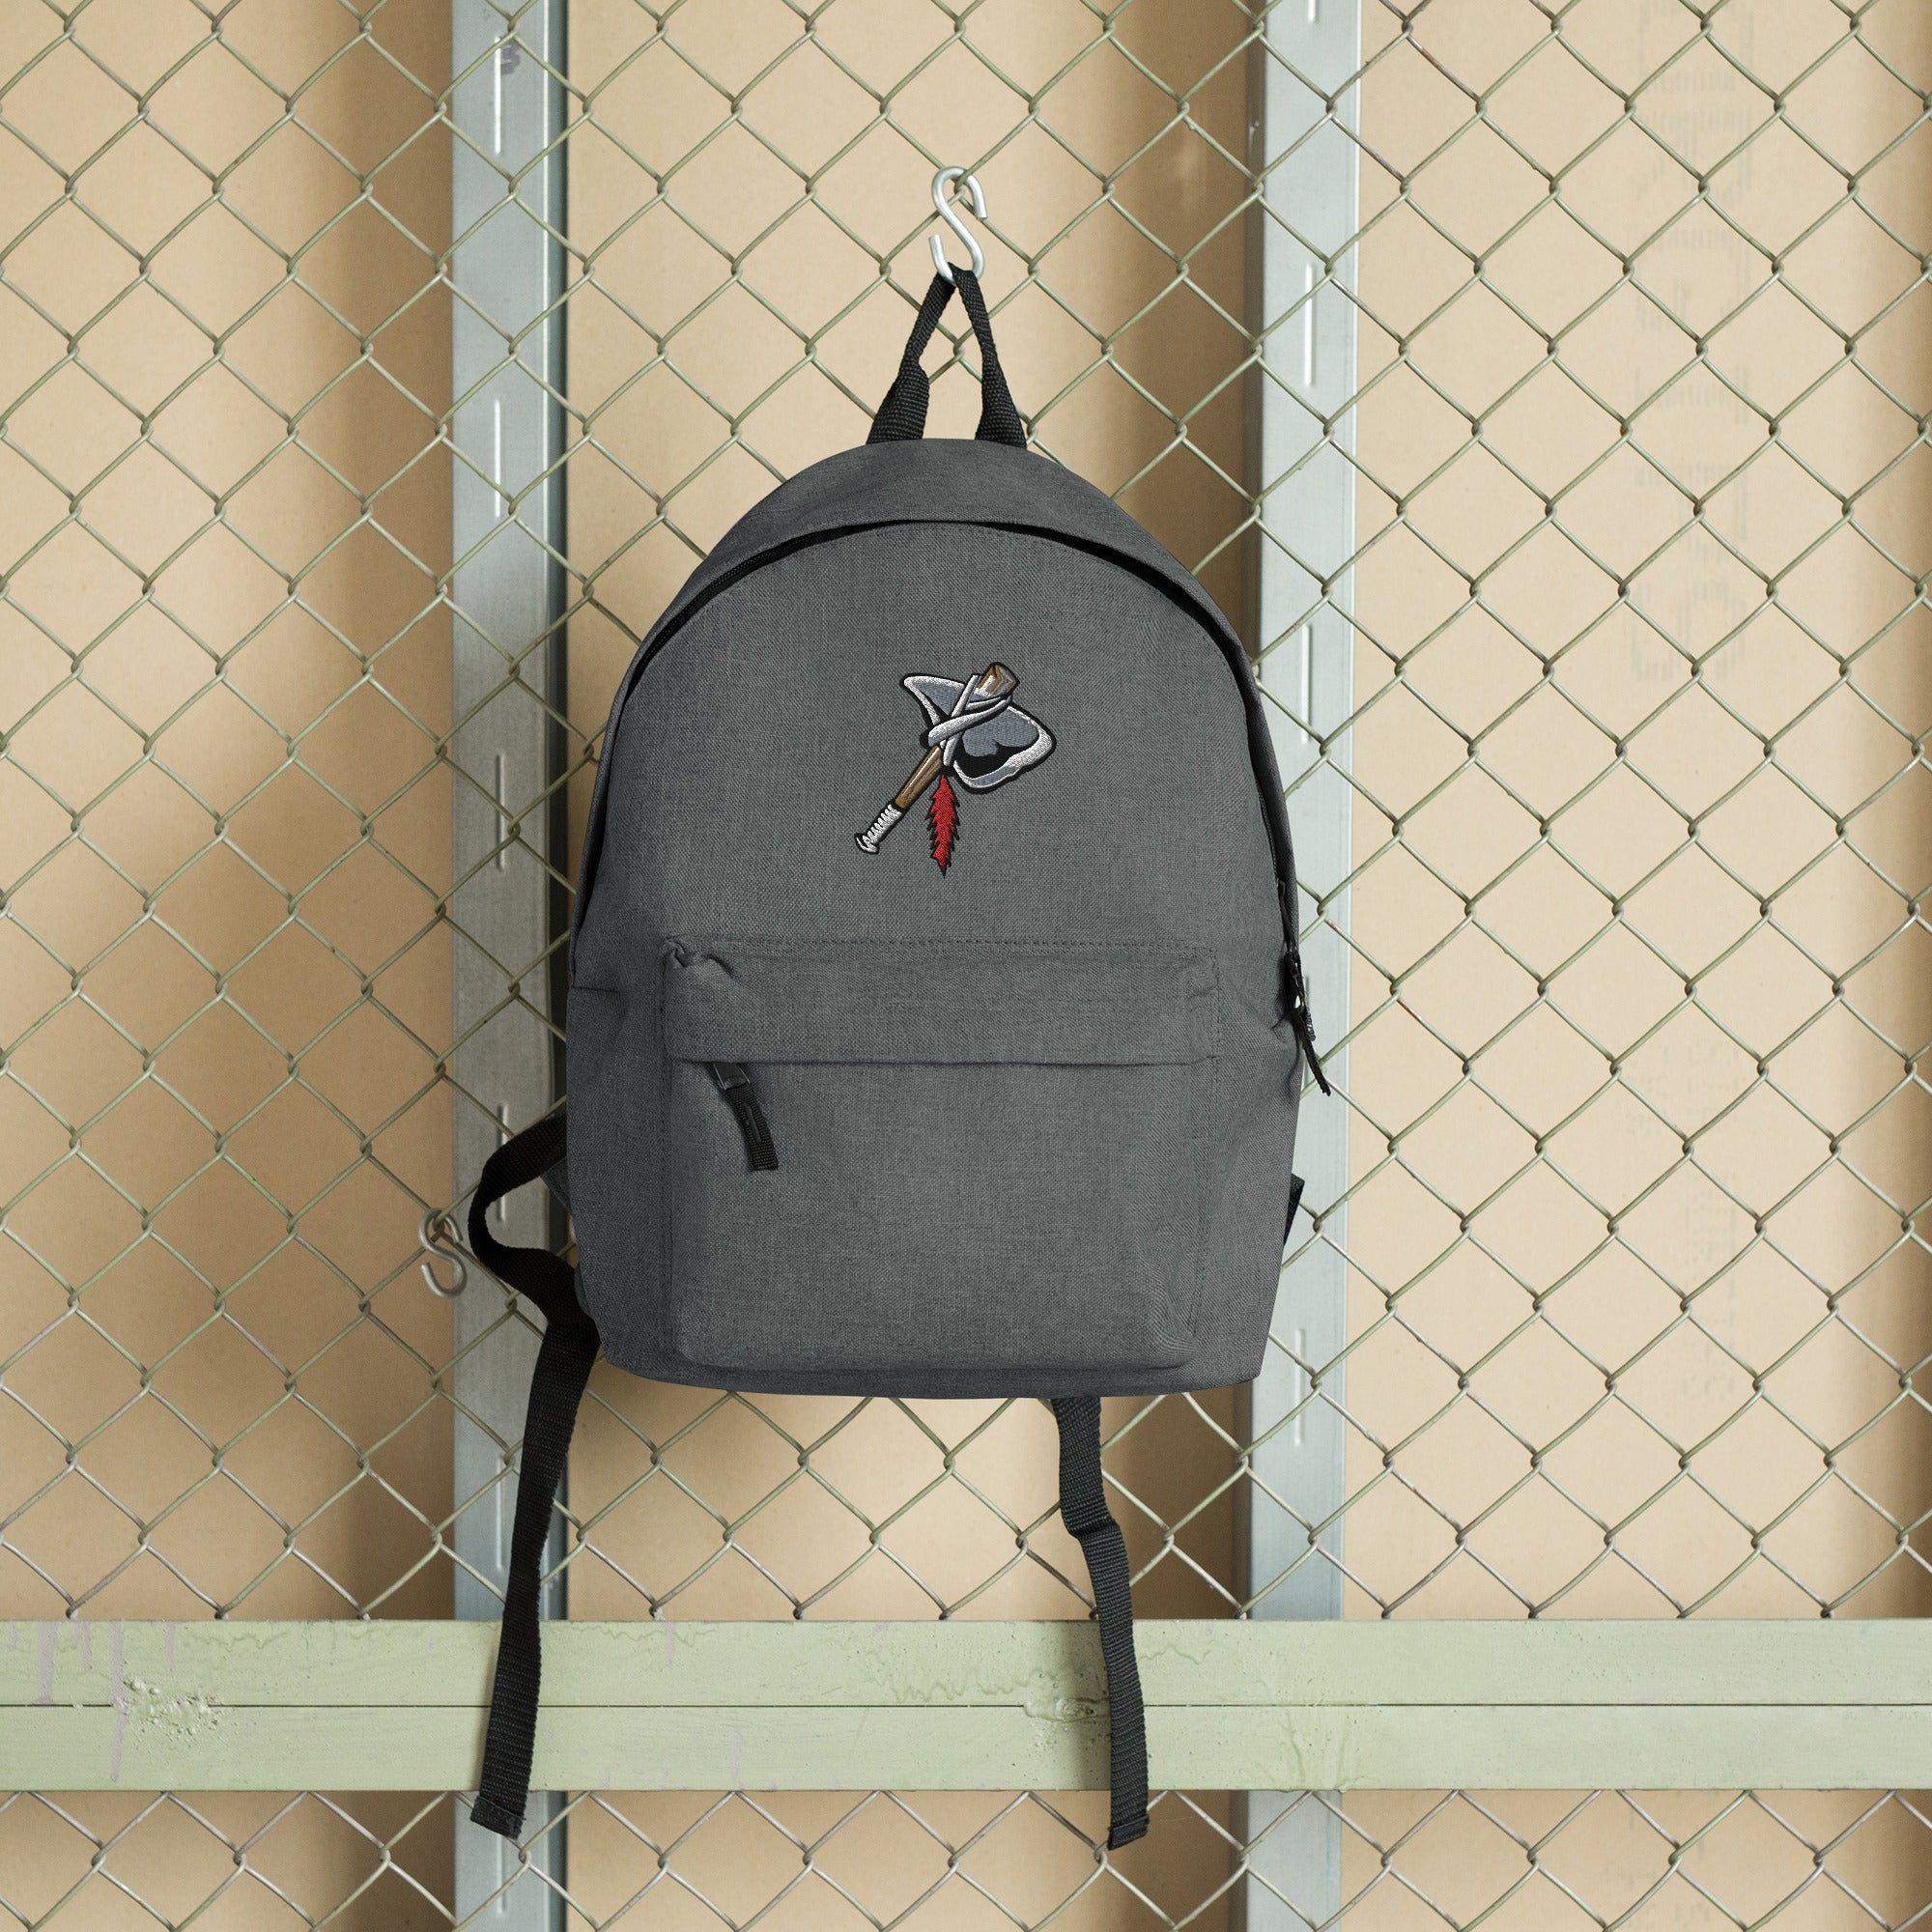 LOL Tomahawks Embroidered Backpack